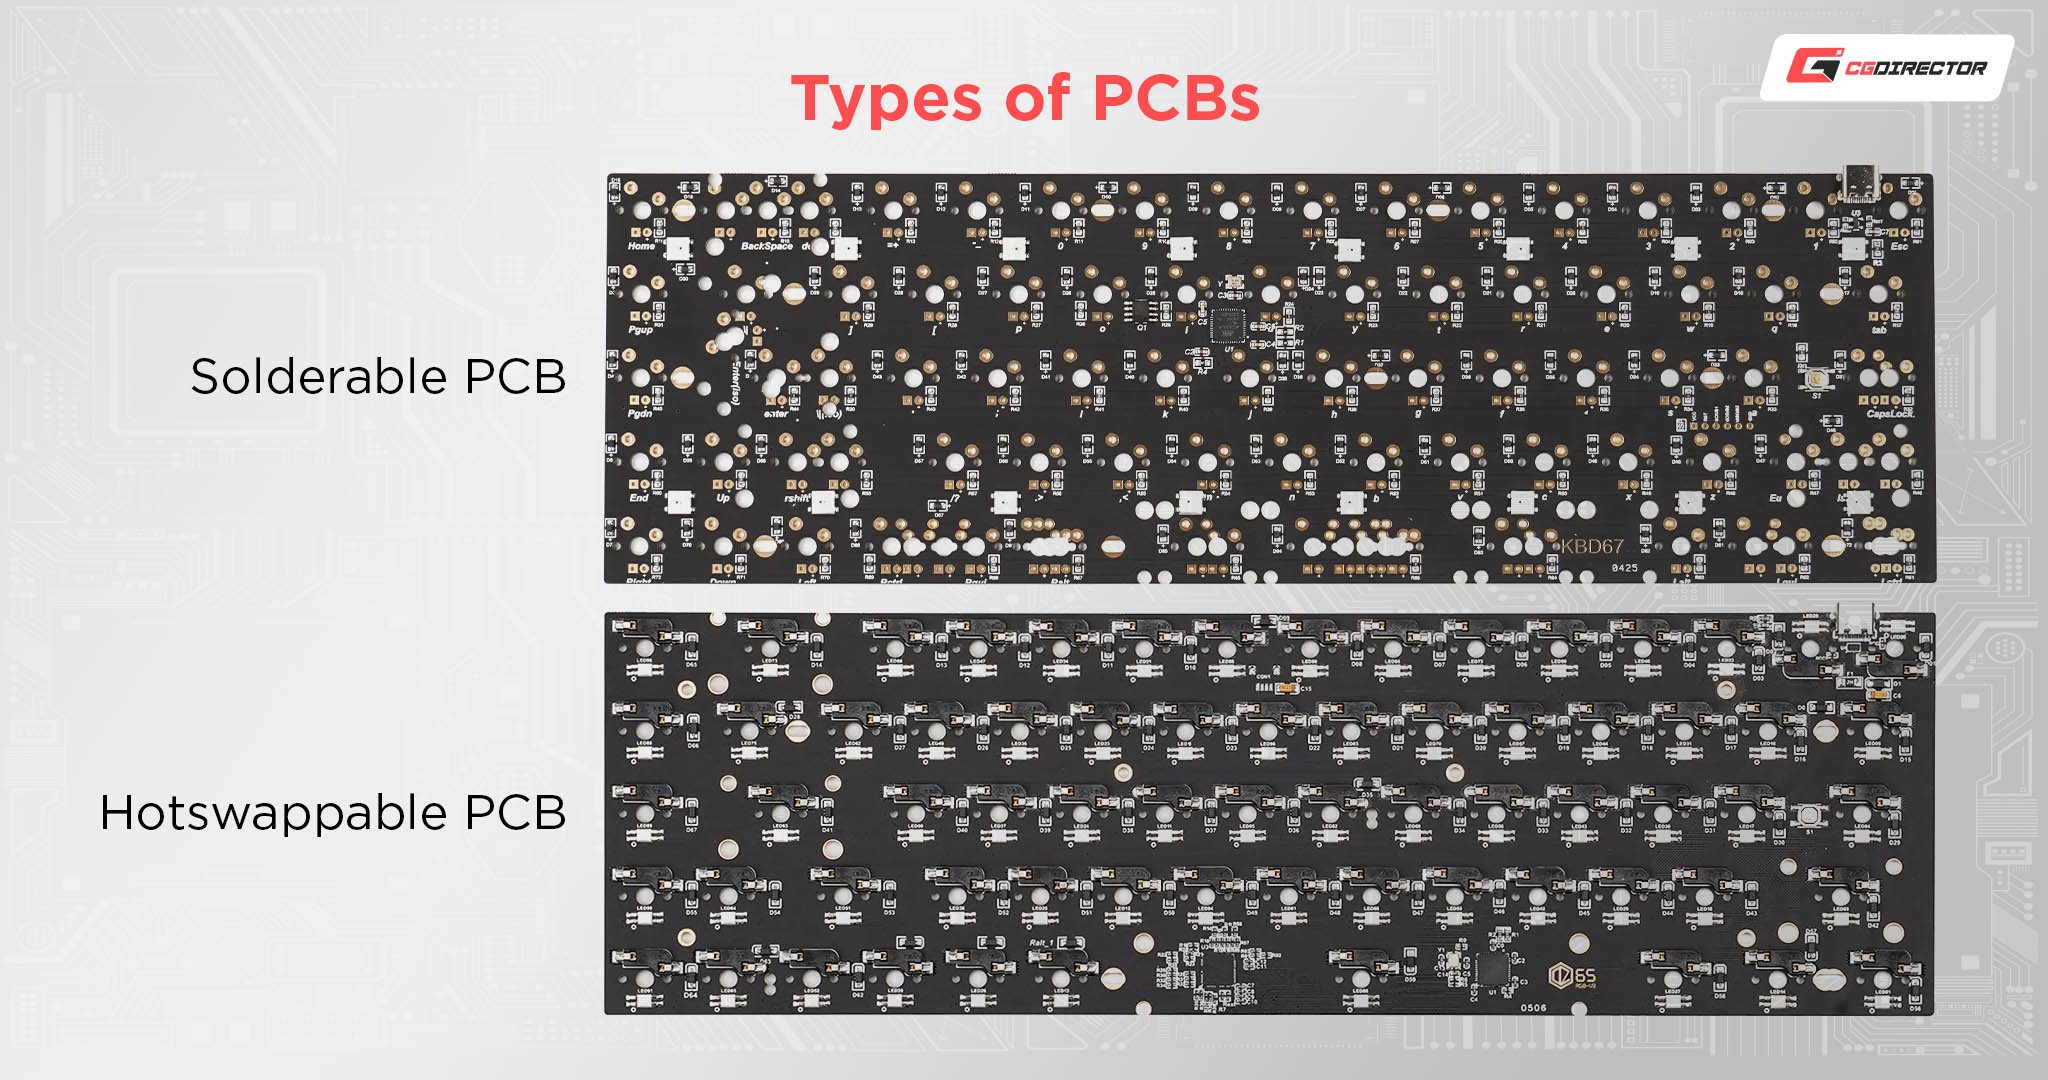 Types of PCBs